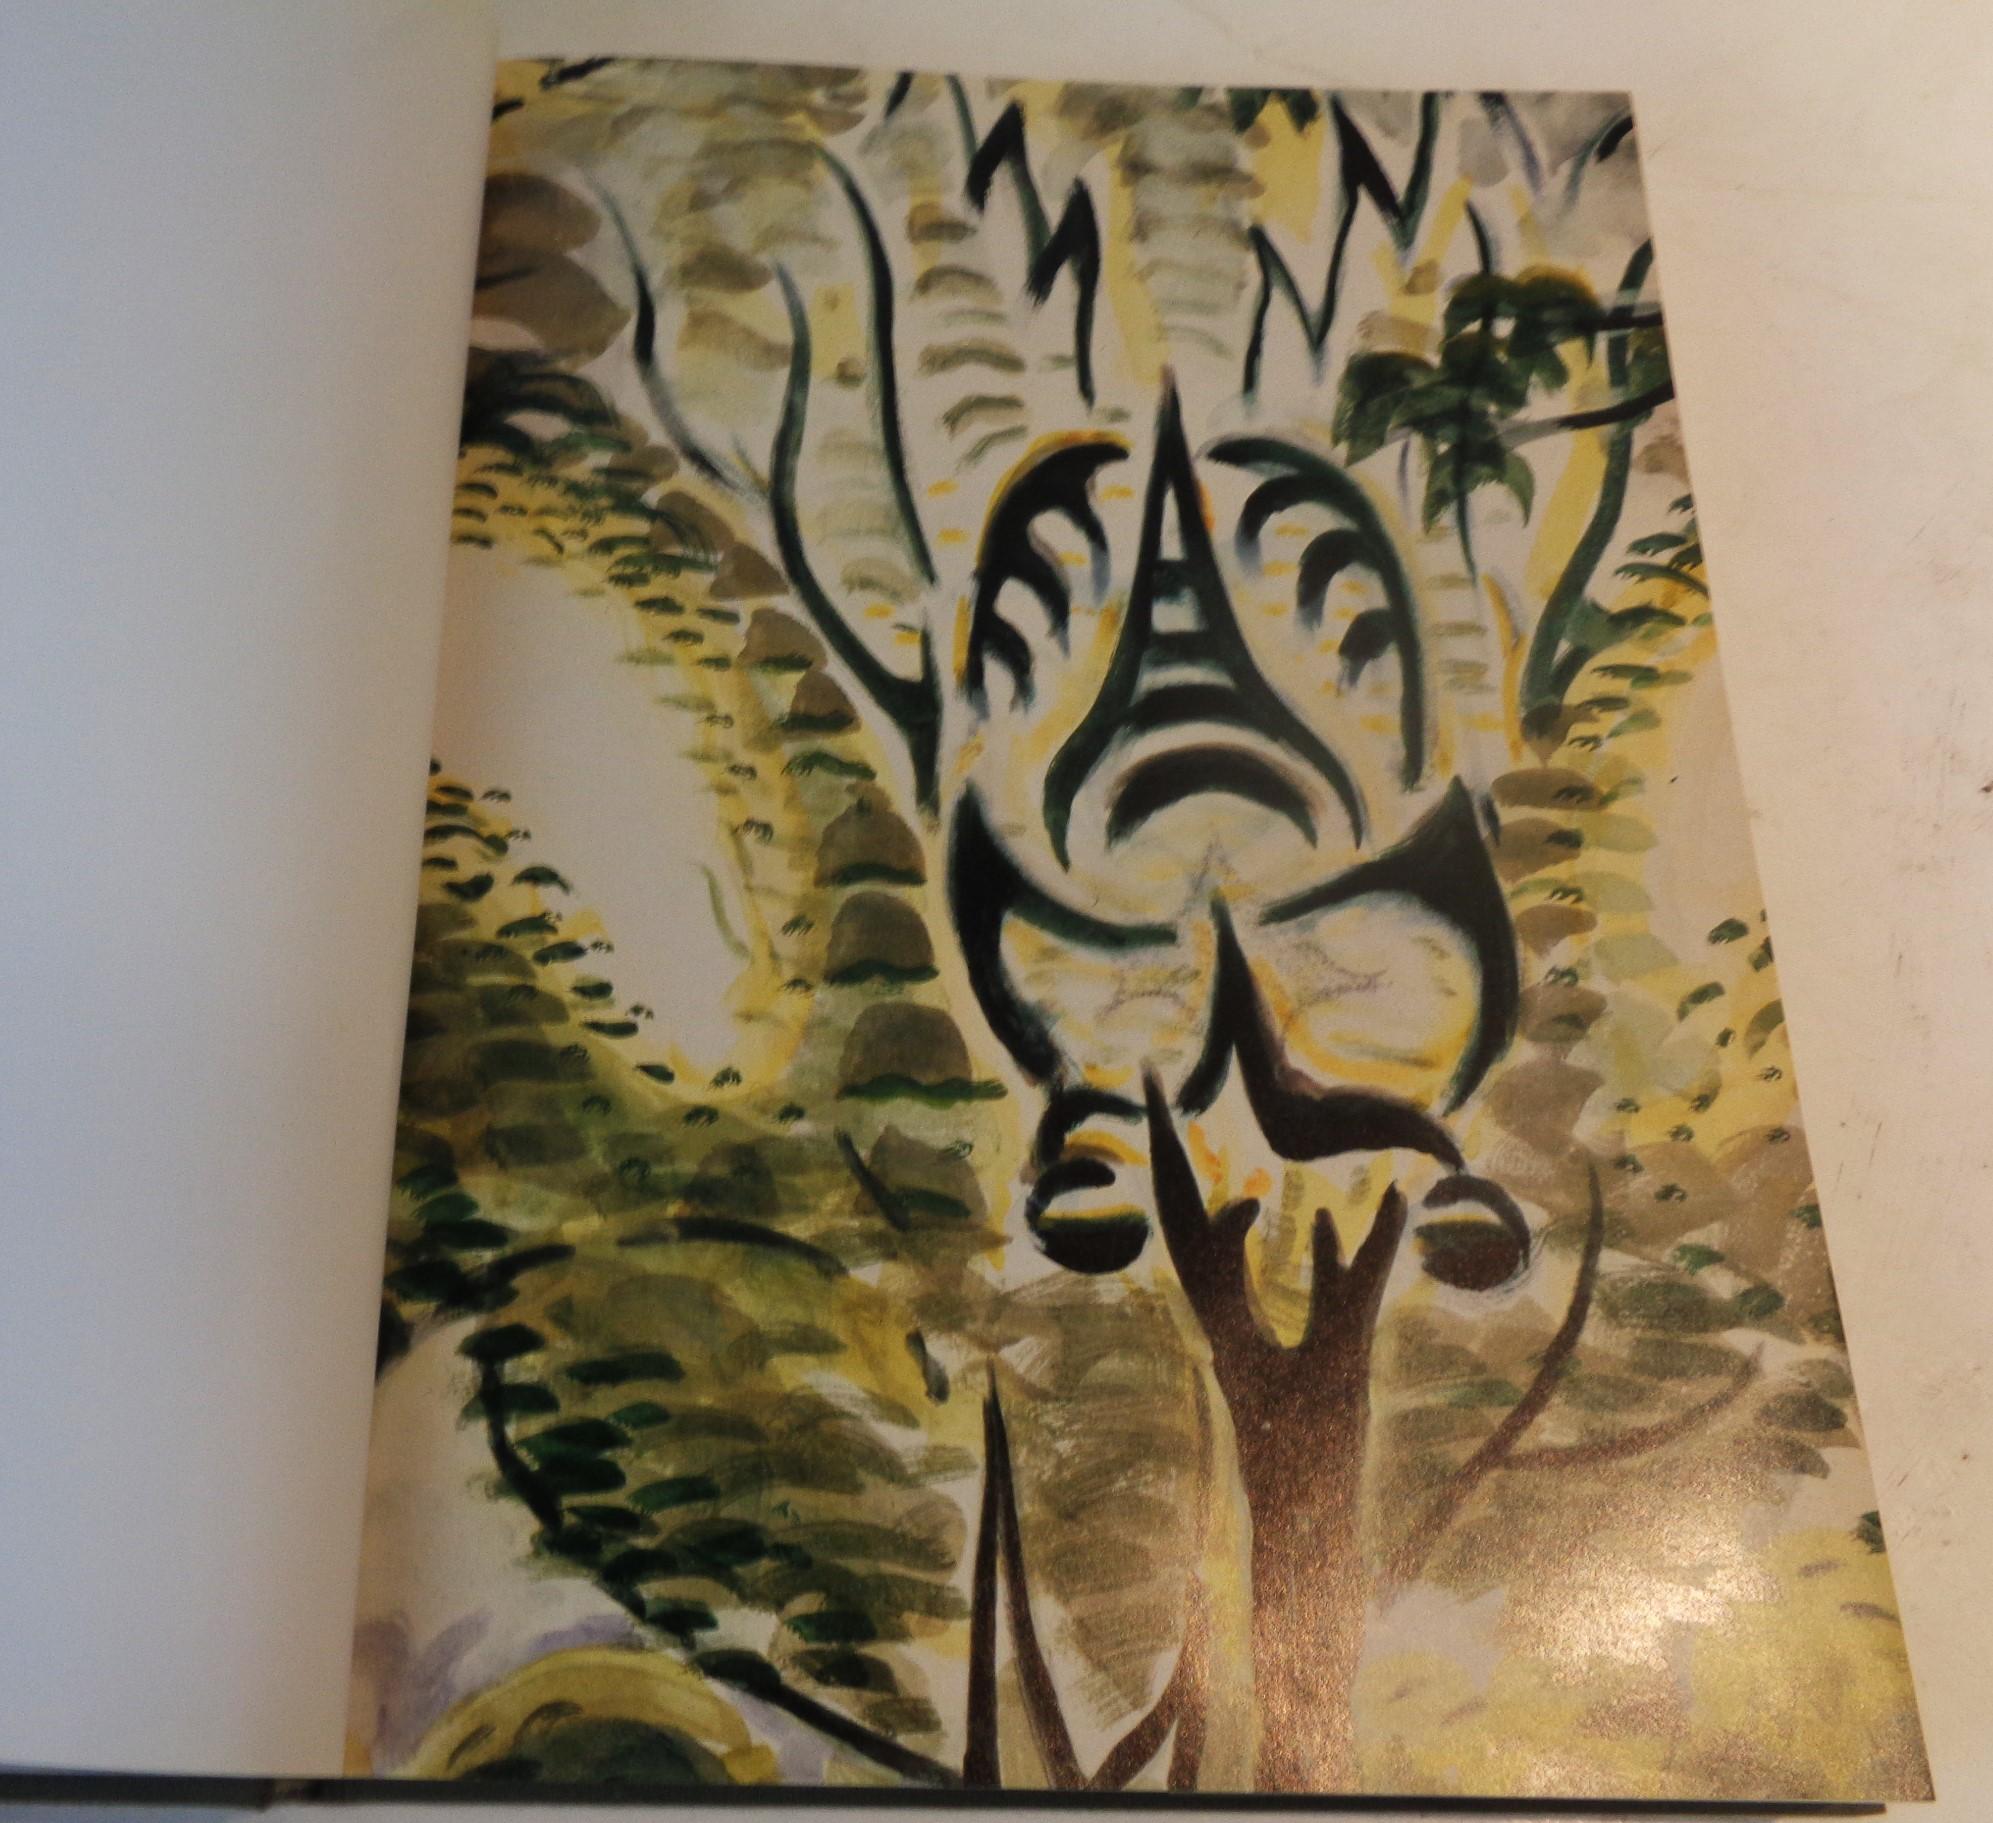 Canadian The Paintings of Charles Burchfield North by Midwest - 1997 Abrams, 1st Ed. 